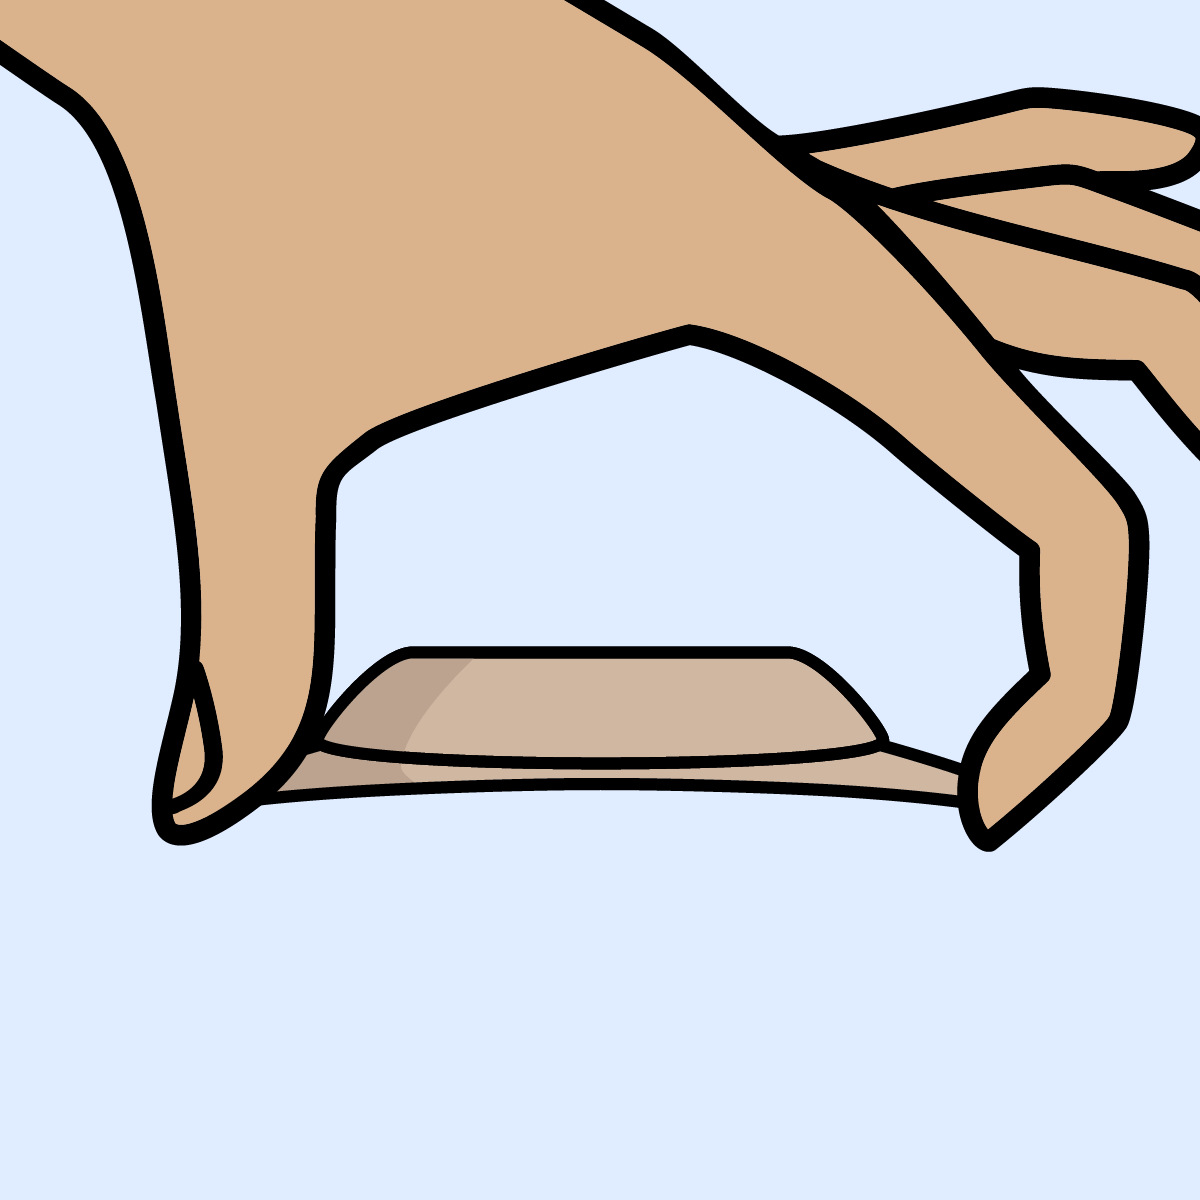 Animated GIF displaying flexible convex skin barrier bending when pressed at the top and bottom.